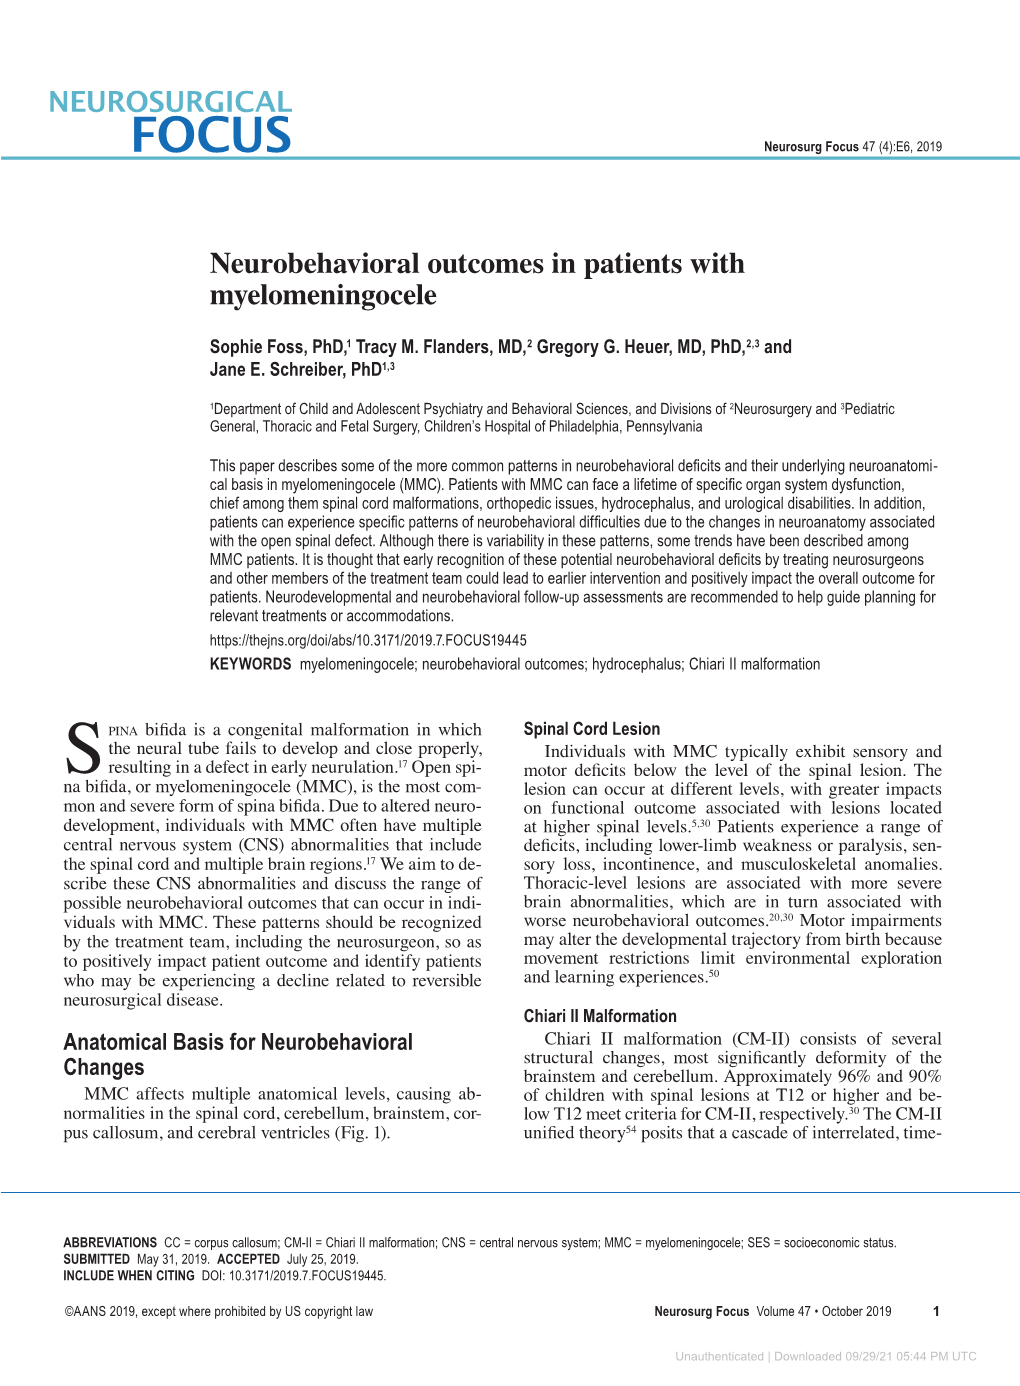 Neurobehavioral Outcomes in Patients with Myelomeningocele